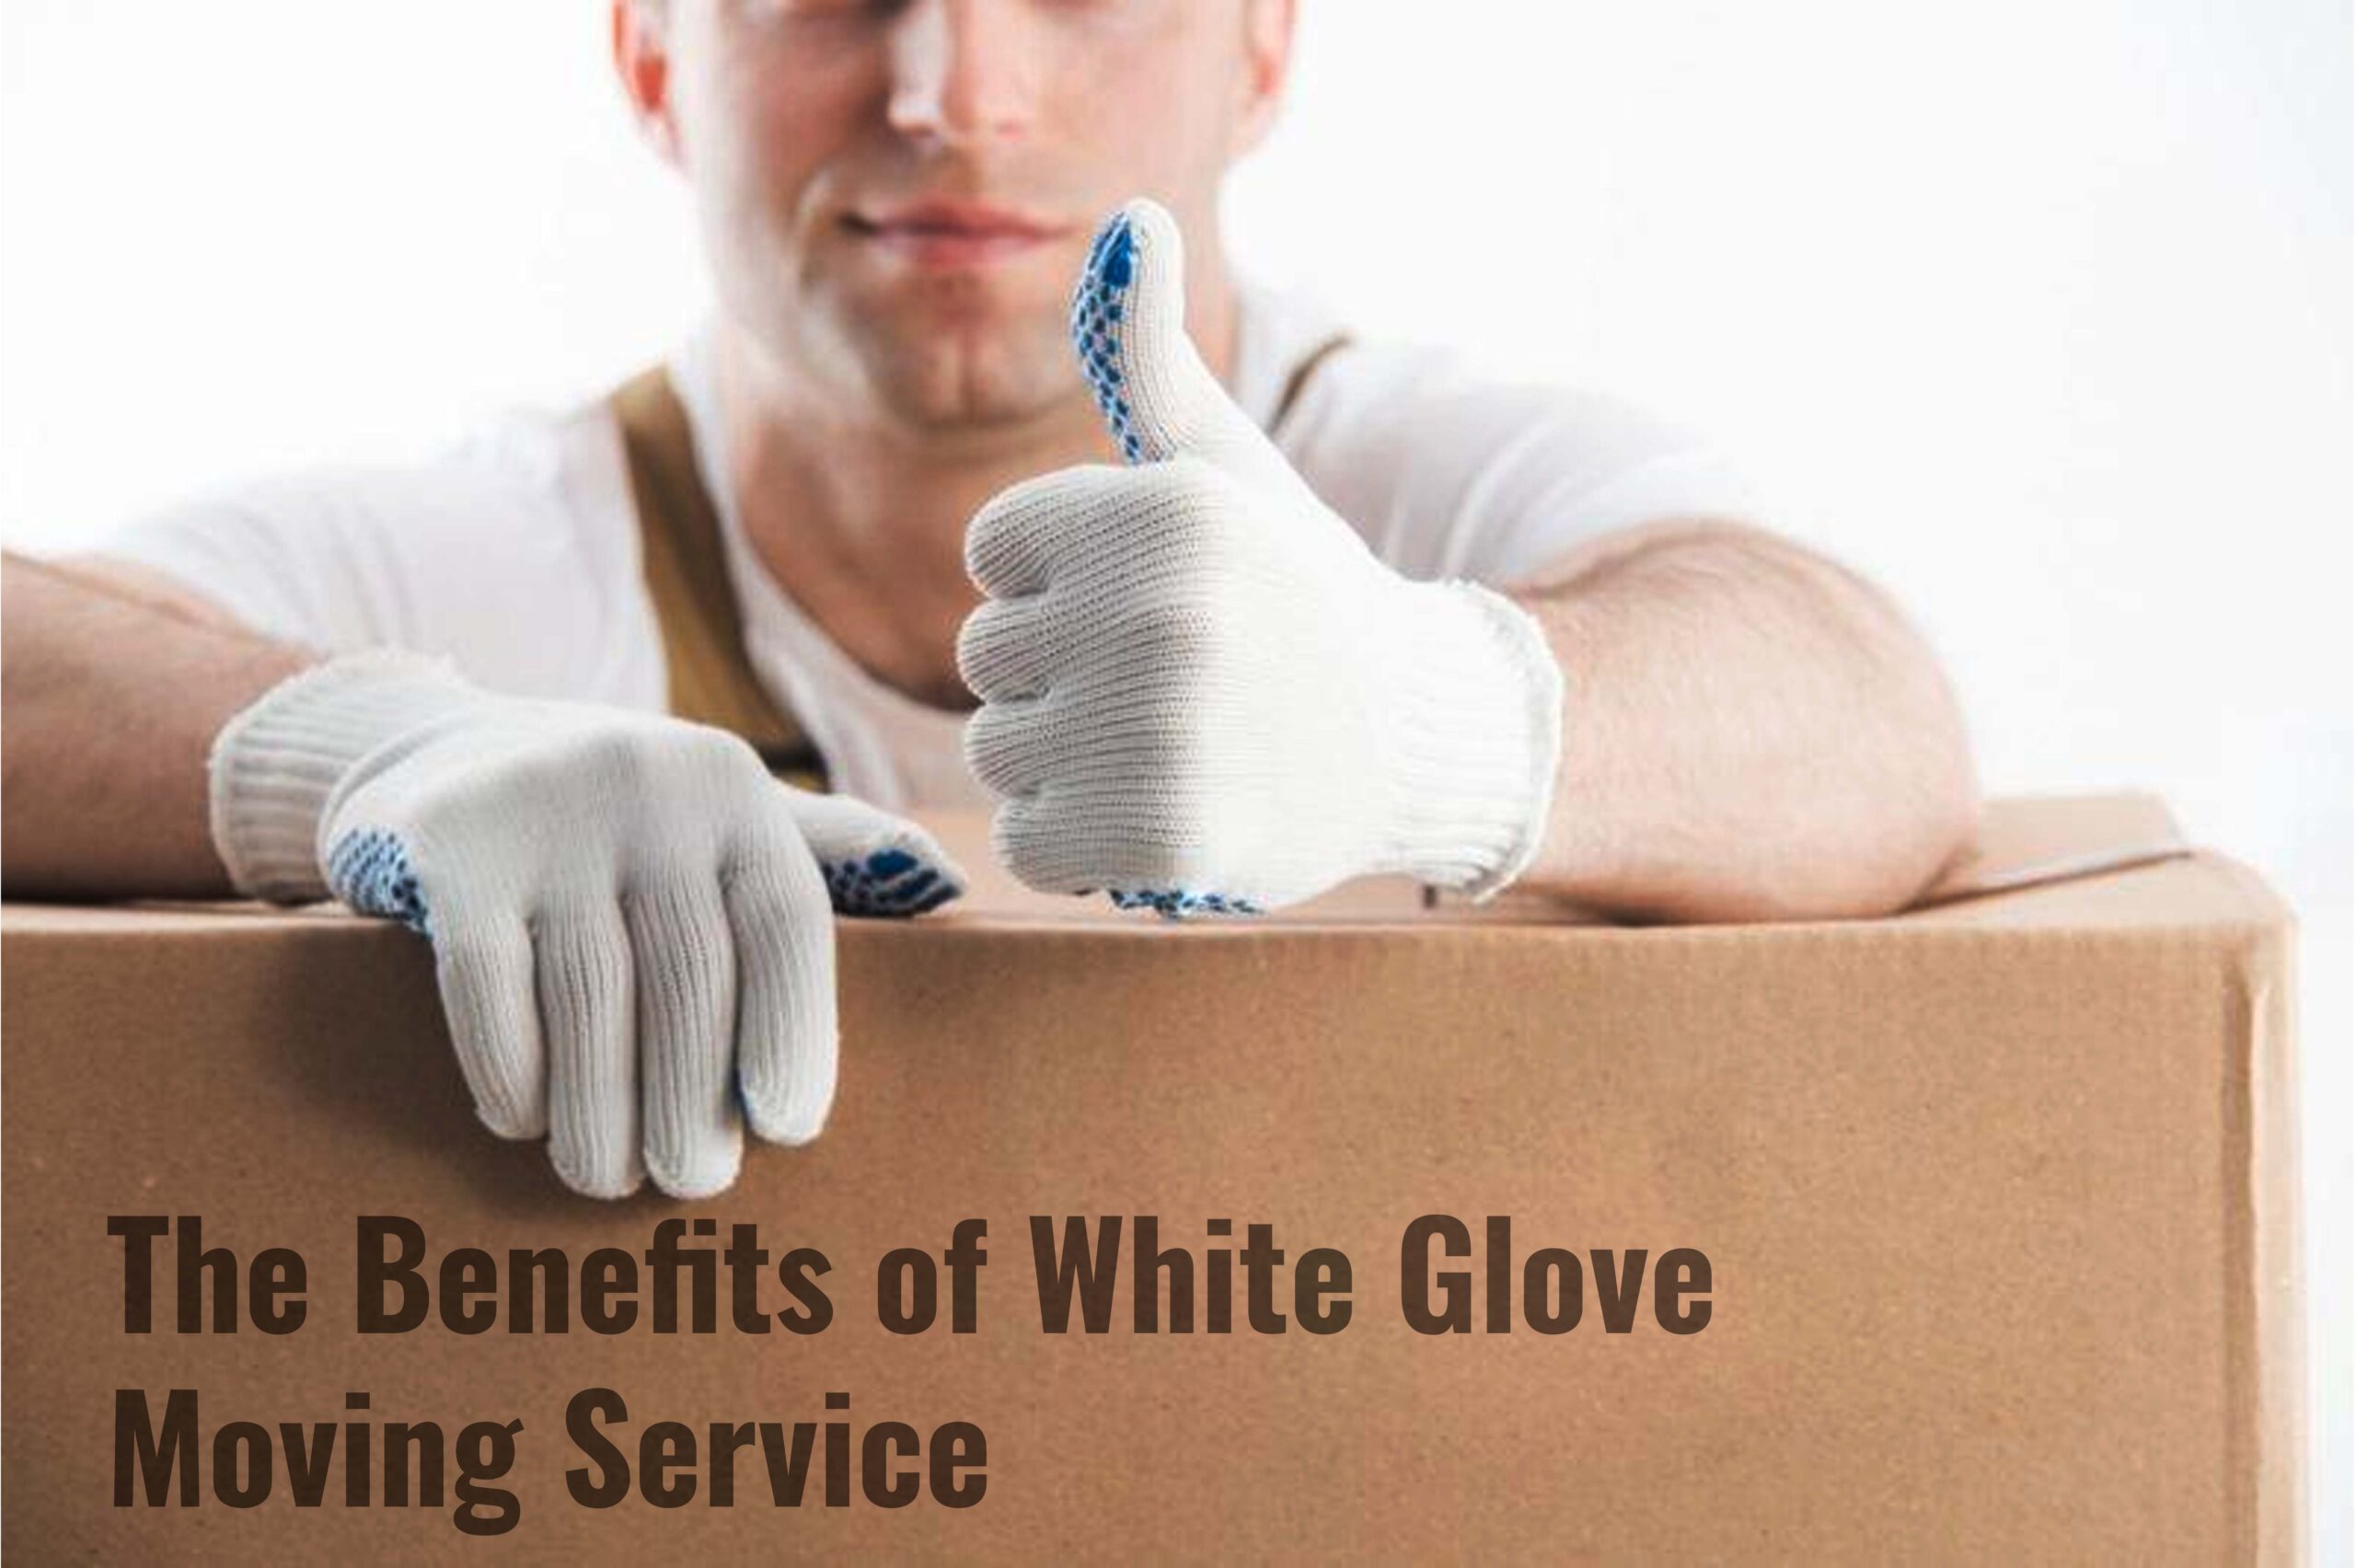 The Benefits of white glove moving service